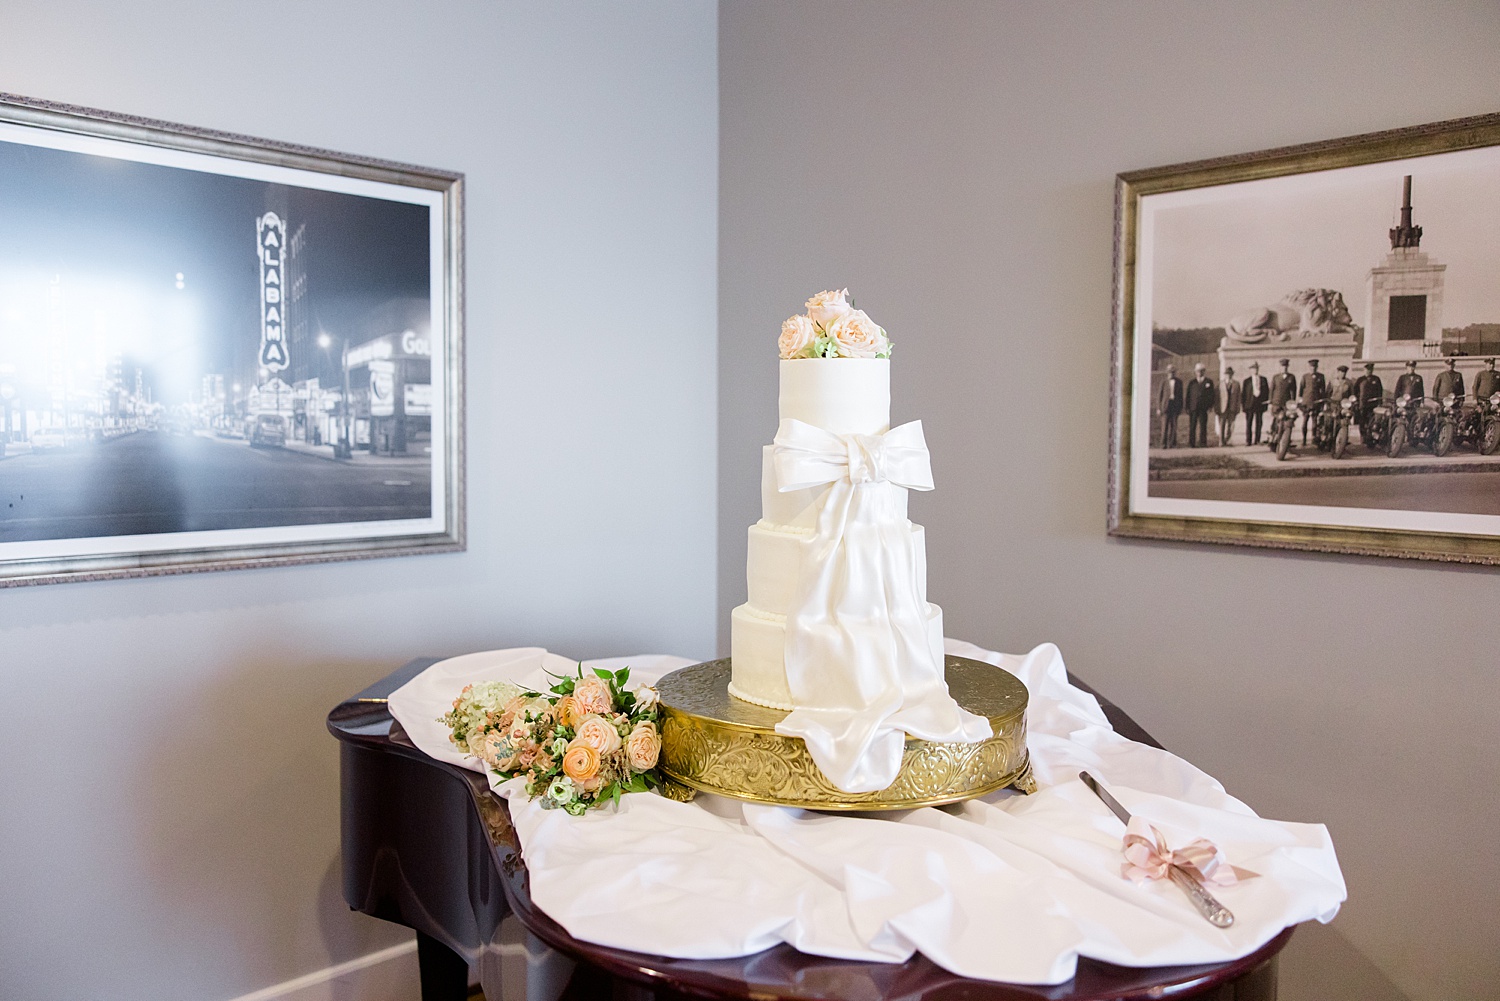 4 tier white wedding cake with bow on front